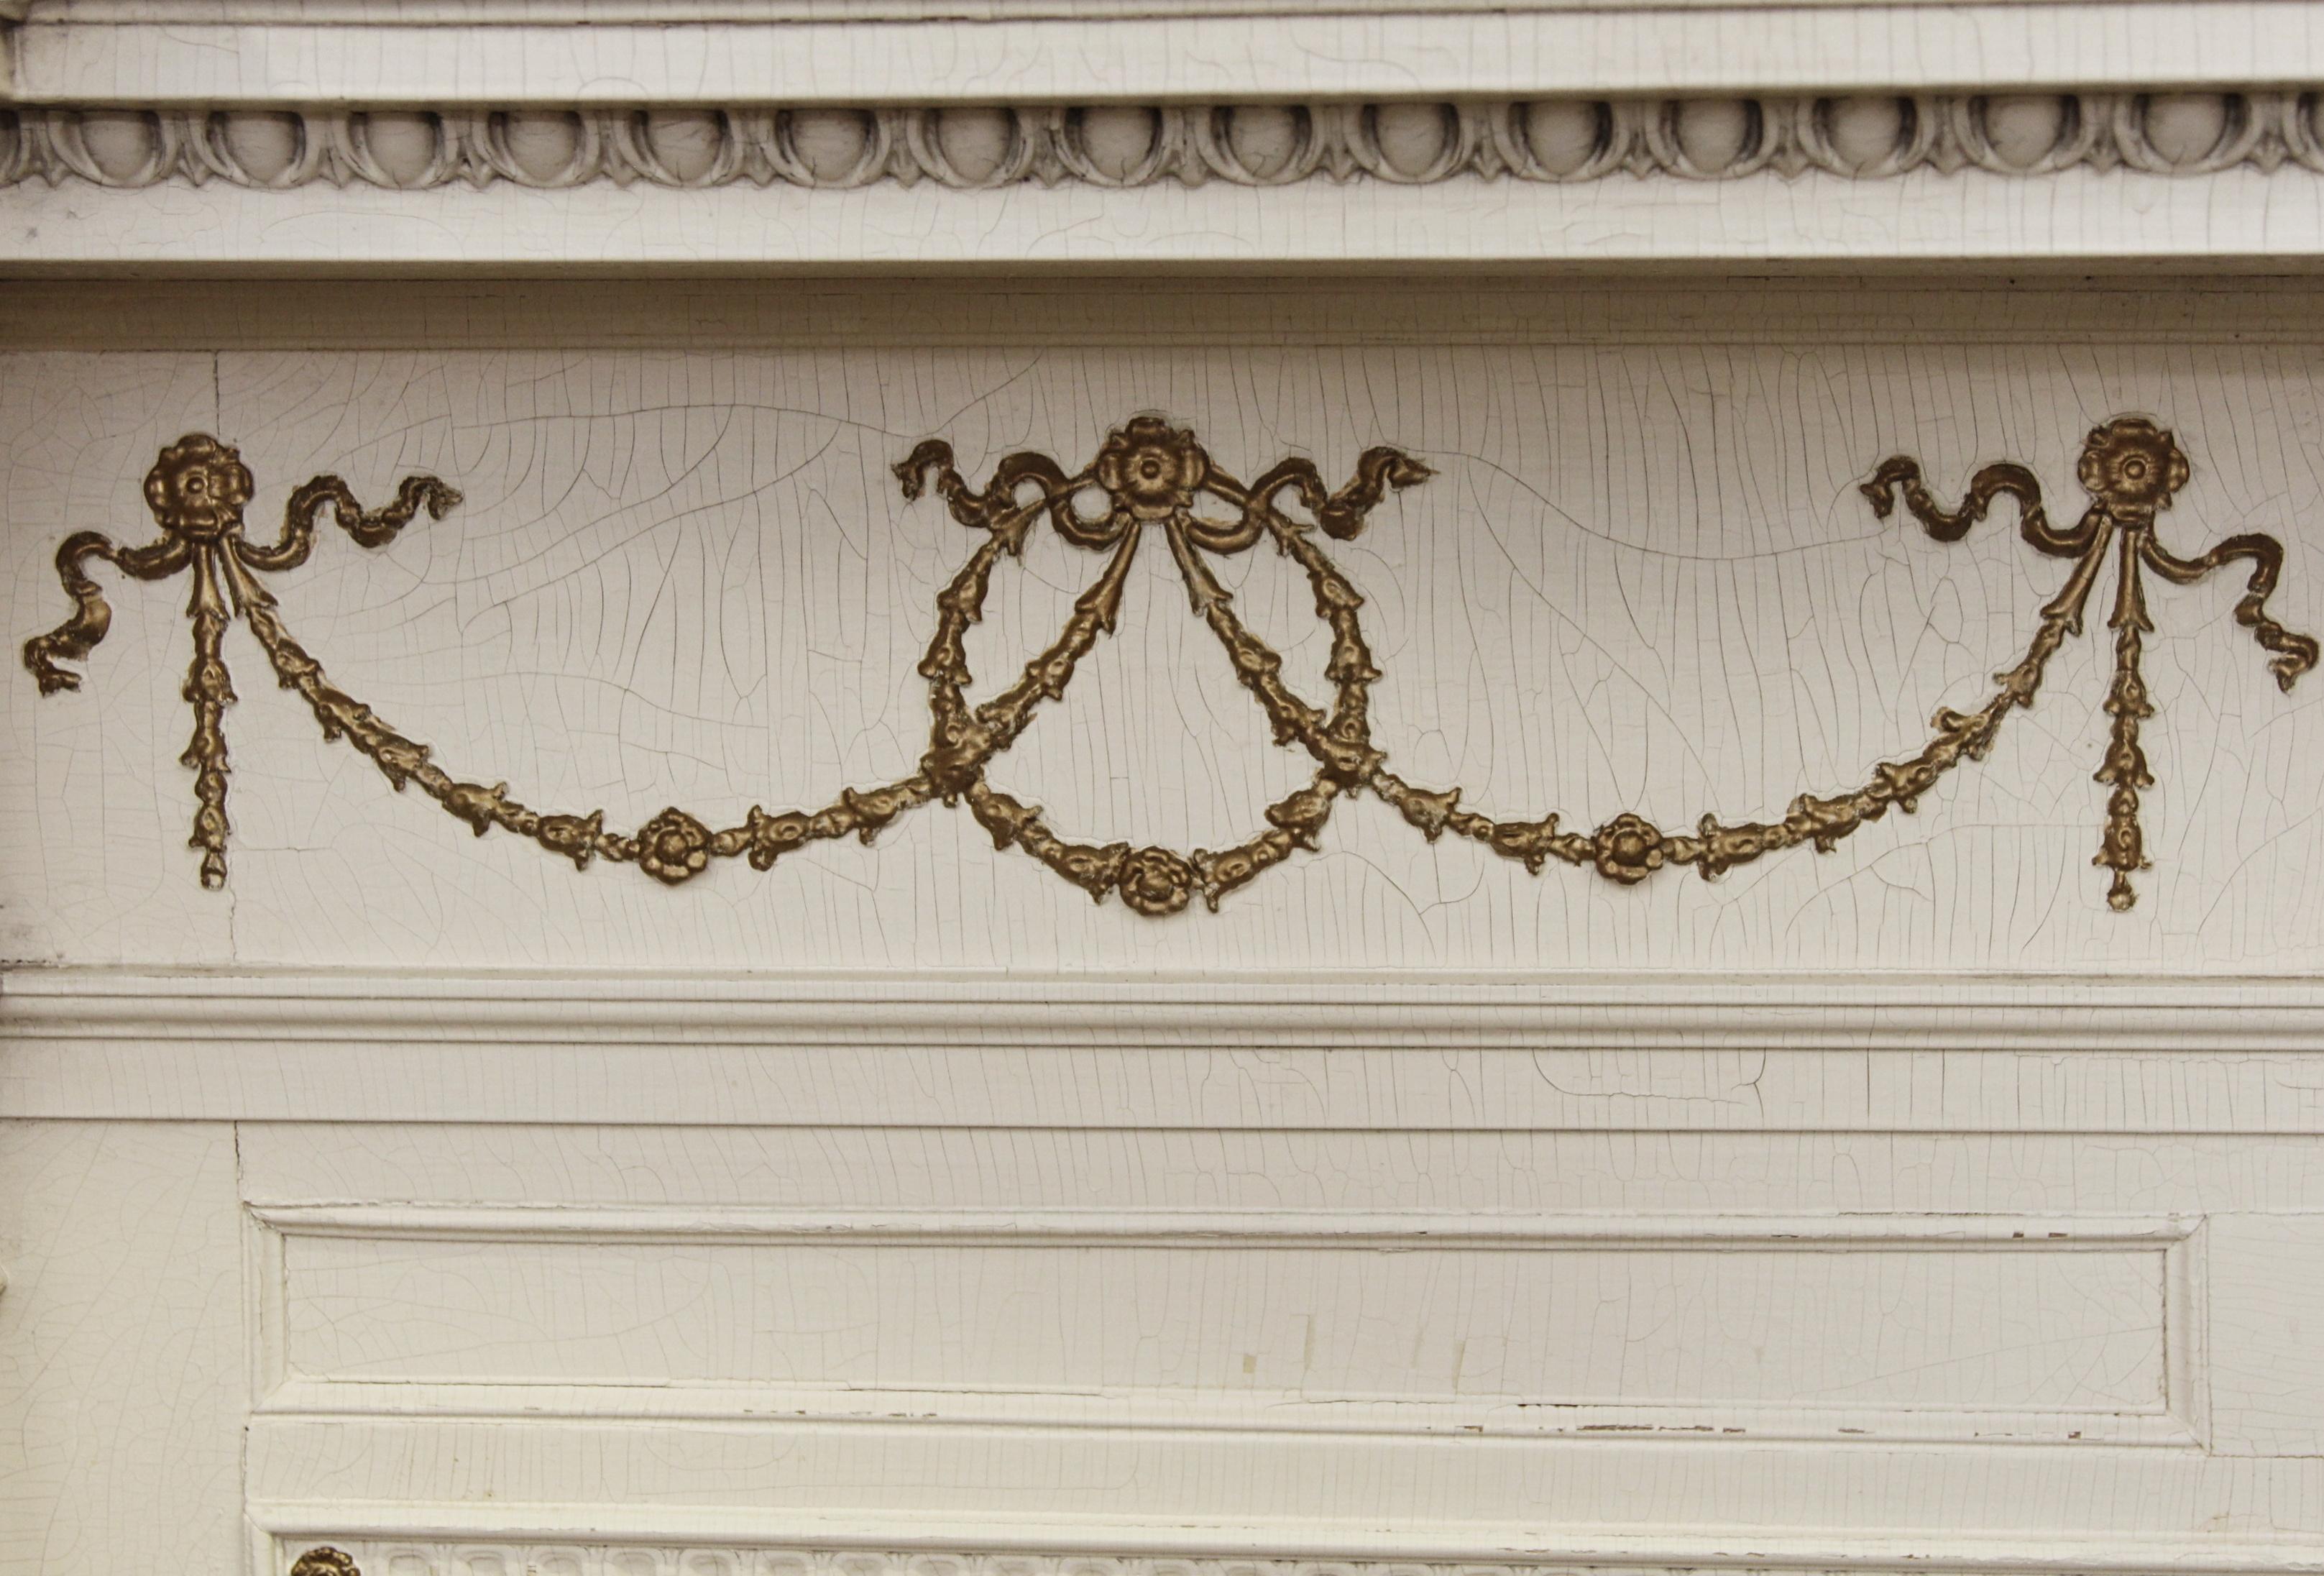 Federal style mantel with egg and dart details and slim columns on each side. This mantel is in great condition, with minor wear and tear and peeling paint. Made by E. Bradley Currier Co. on September 26, 1905. Style 758BC. This can be seen at our